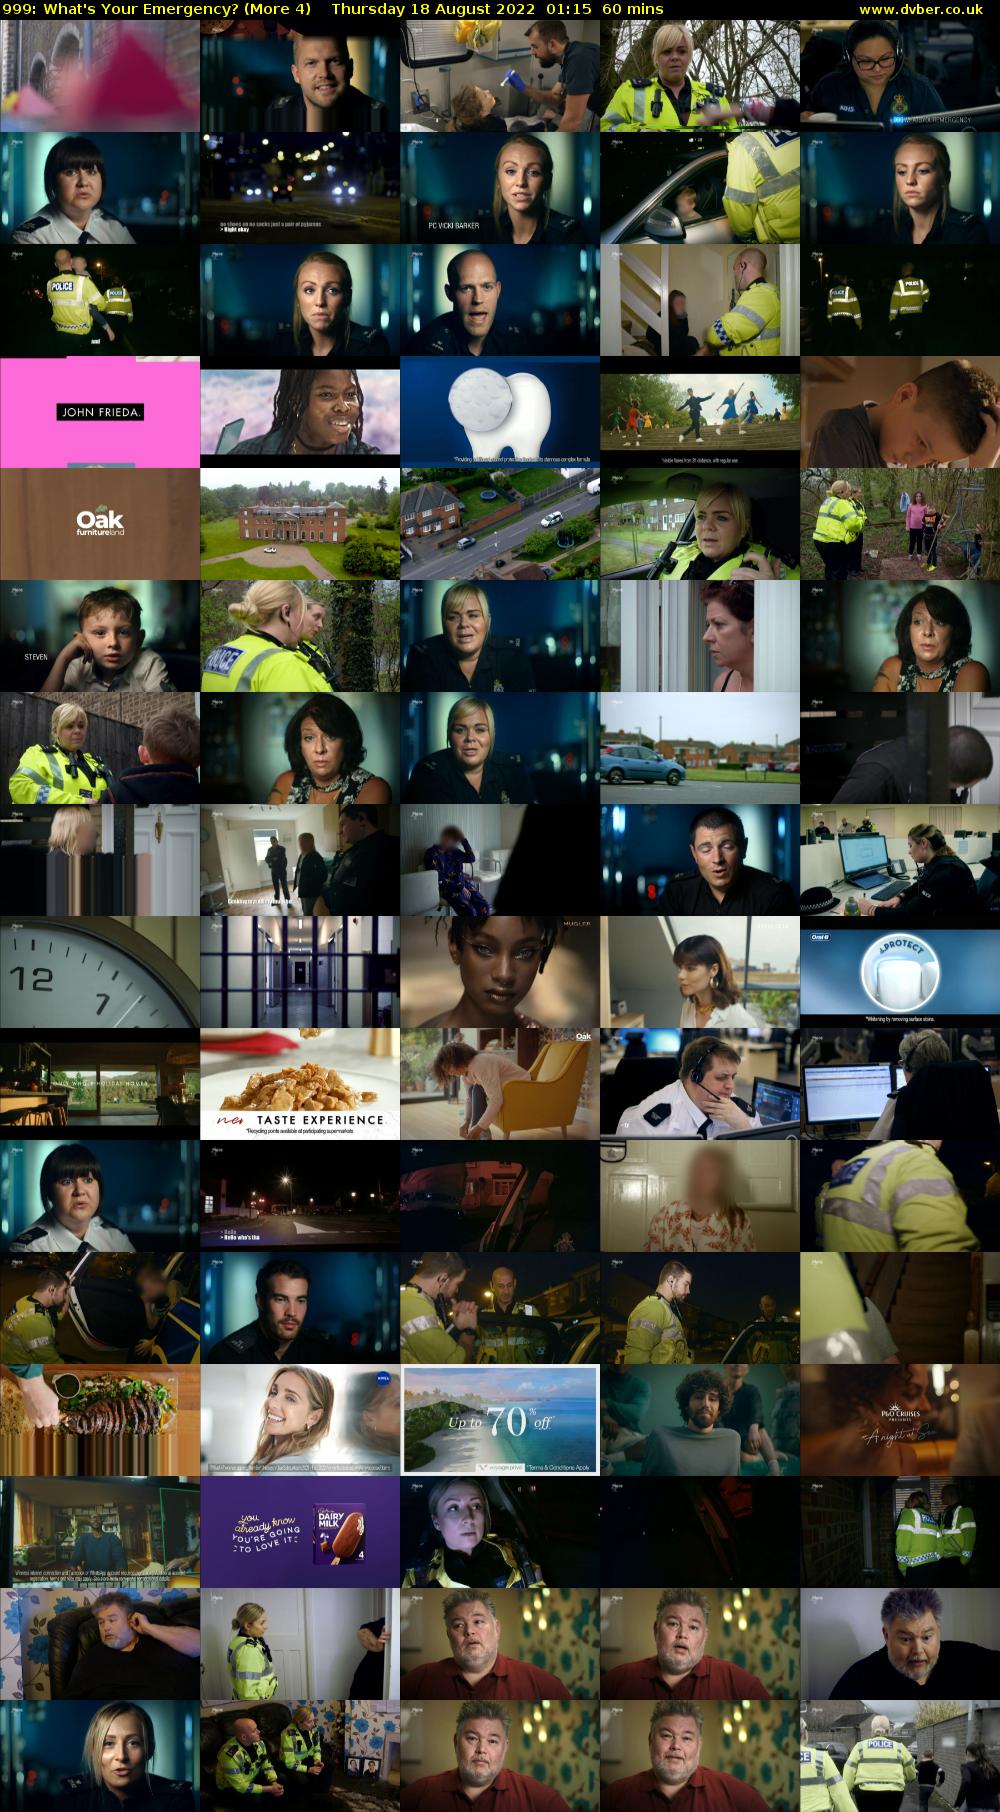 999: What's Your Emergency? (More 4) Thursday 18 August 2022 01:15 - 02:15